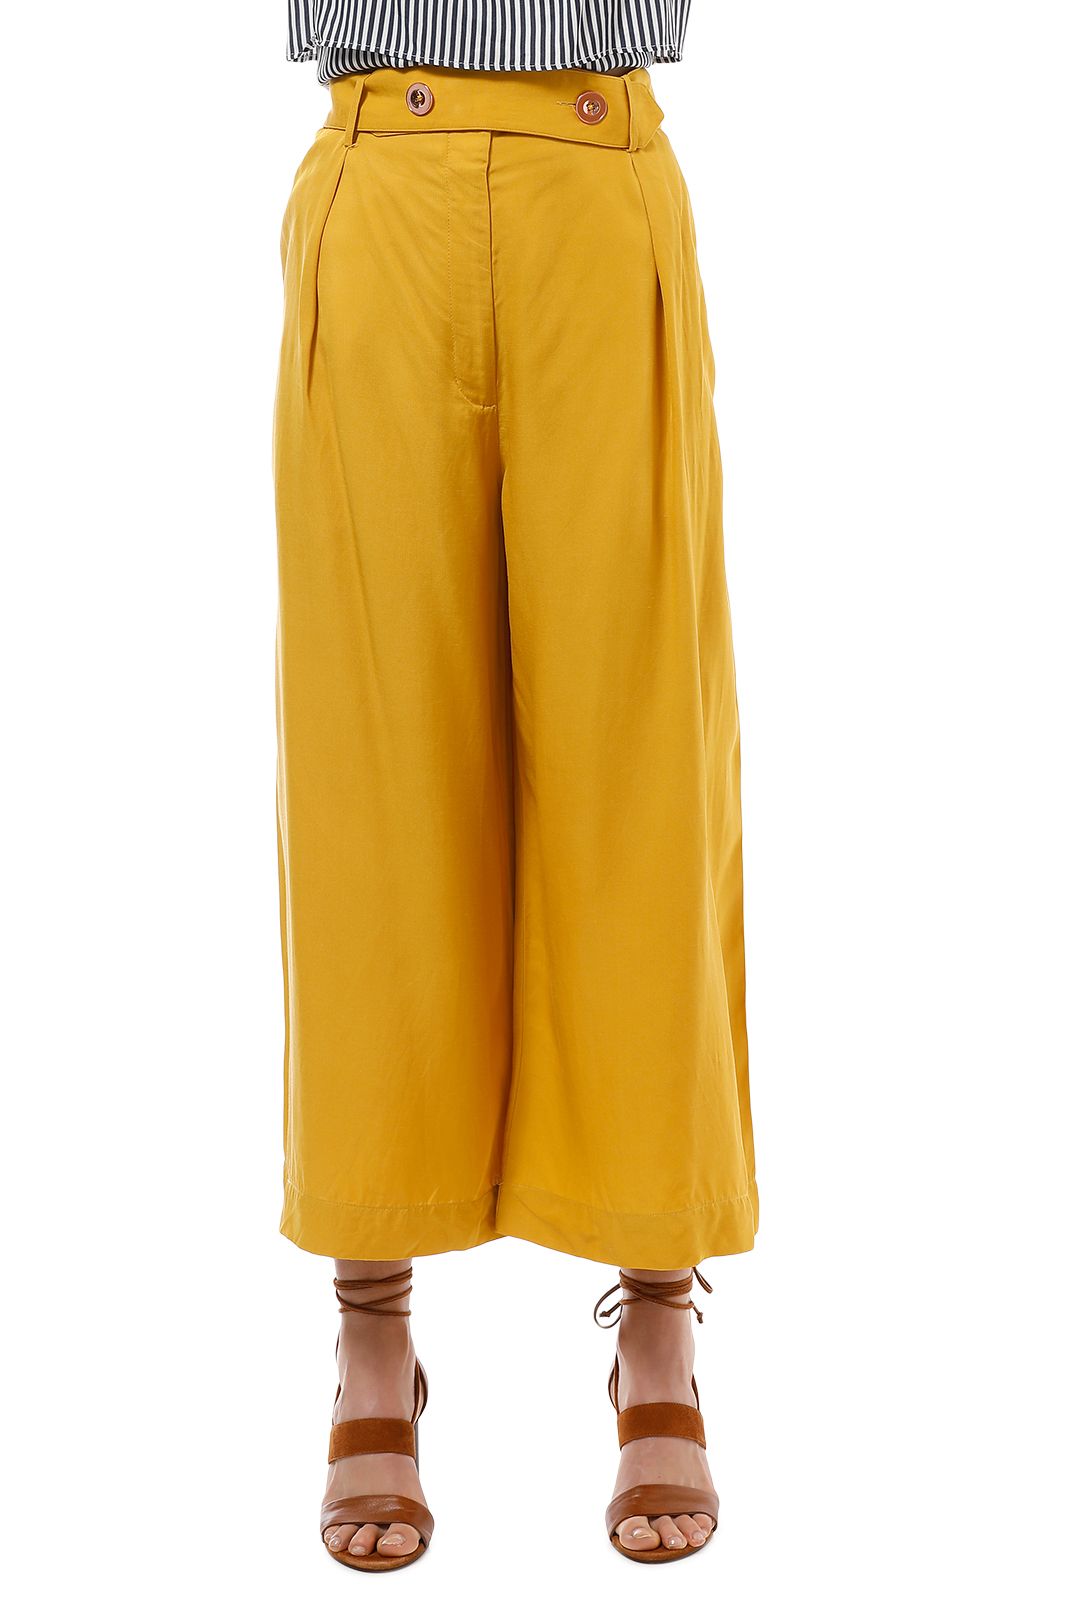 Ginger and Smart - Morph Pant - Mustard Yellow - Front Crop